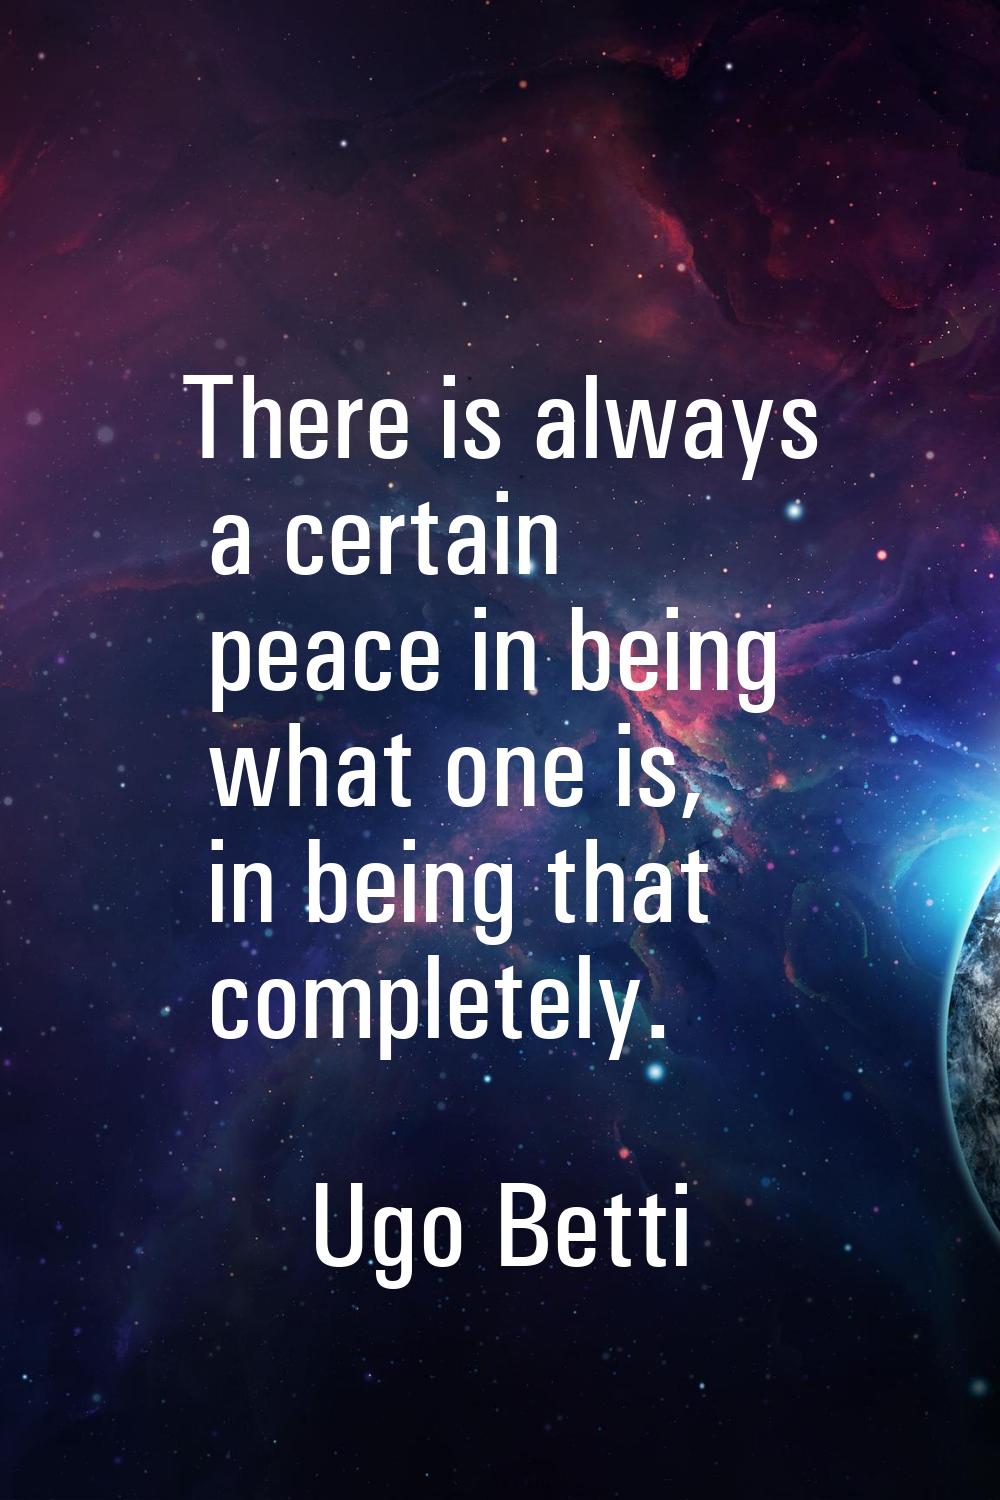 There is always a certain peace in being what one is, in being that completely.